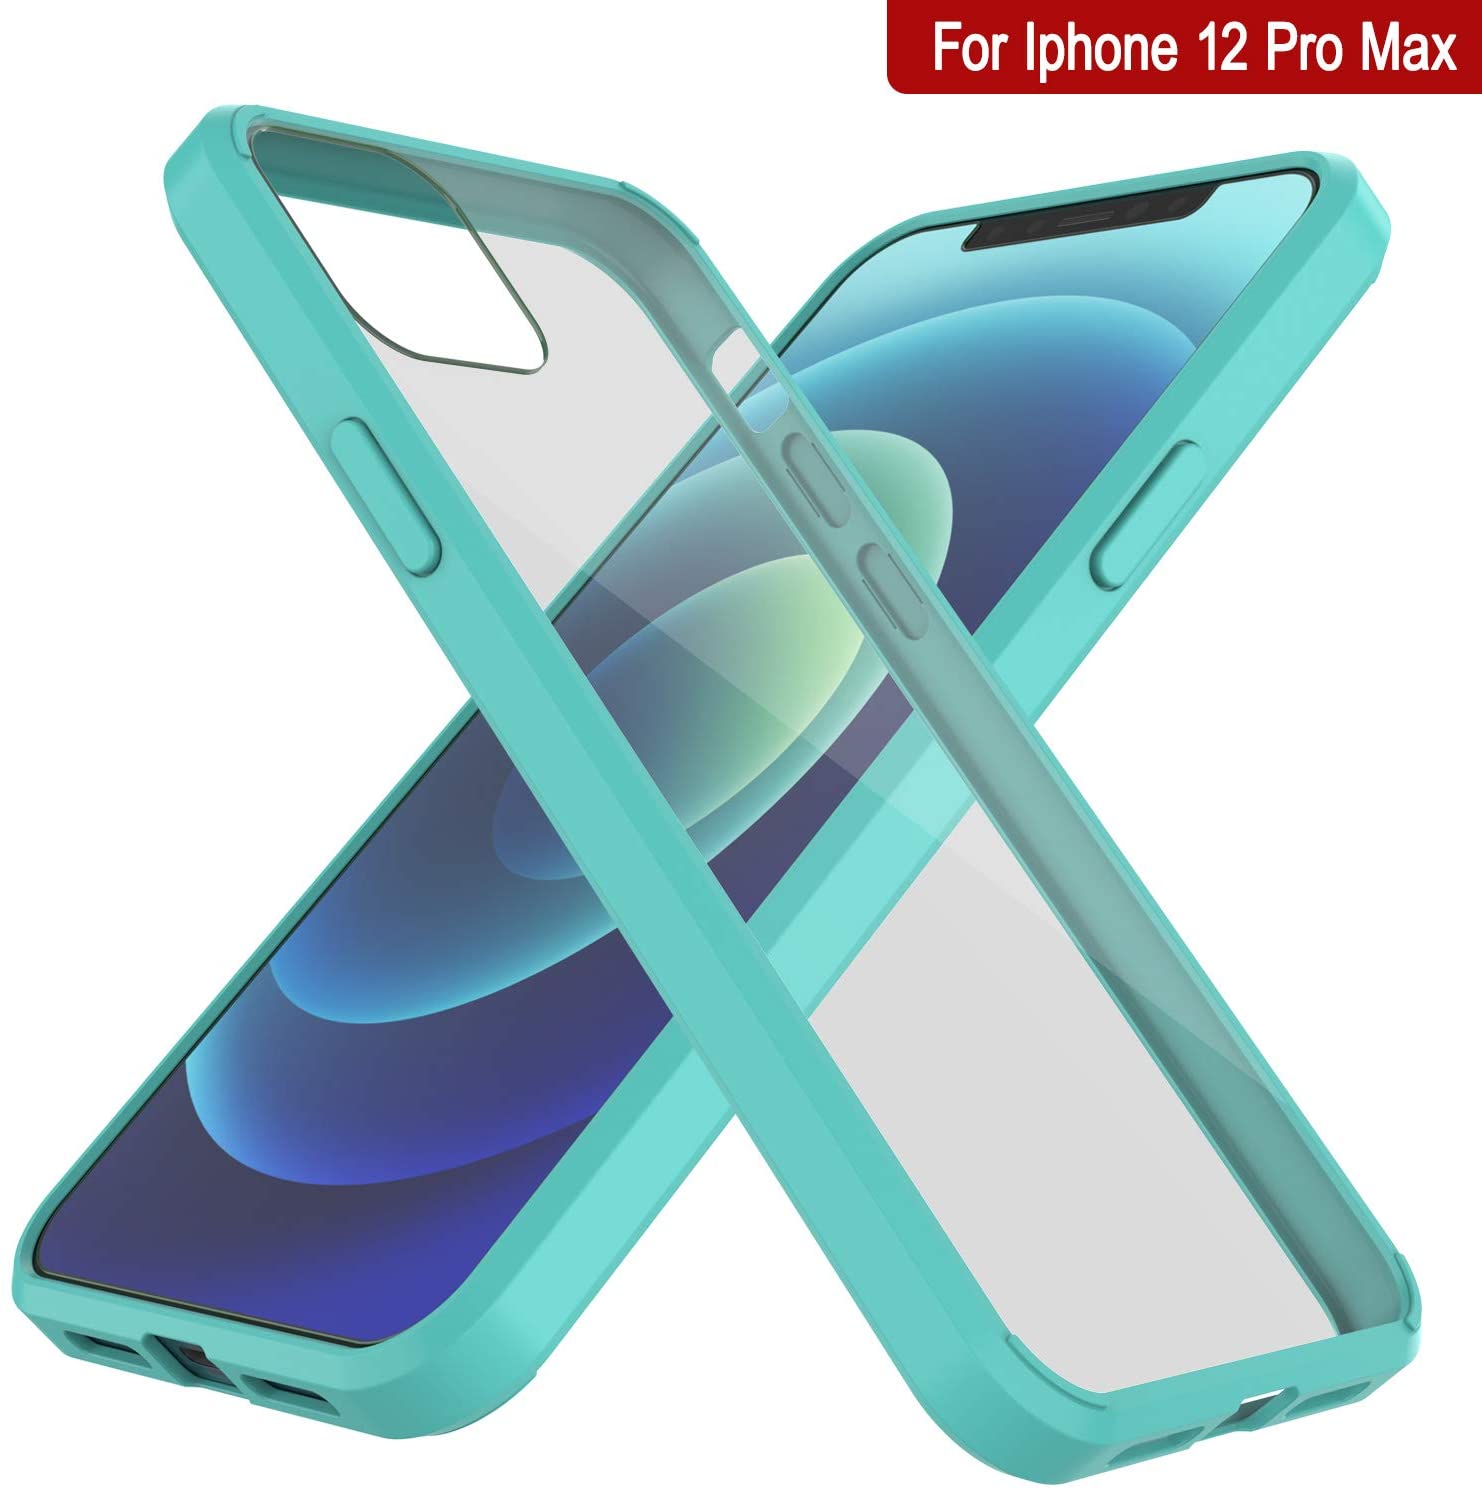 iPhone 12 Pro Max Case Punkcase® LUCID 2.0 Teal Series w/ PUNK SHIELD Screen Protector | Ultra Fit